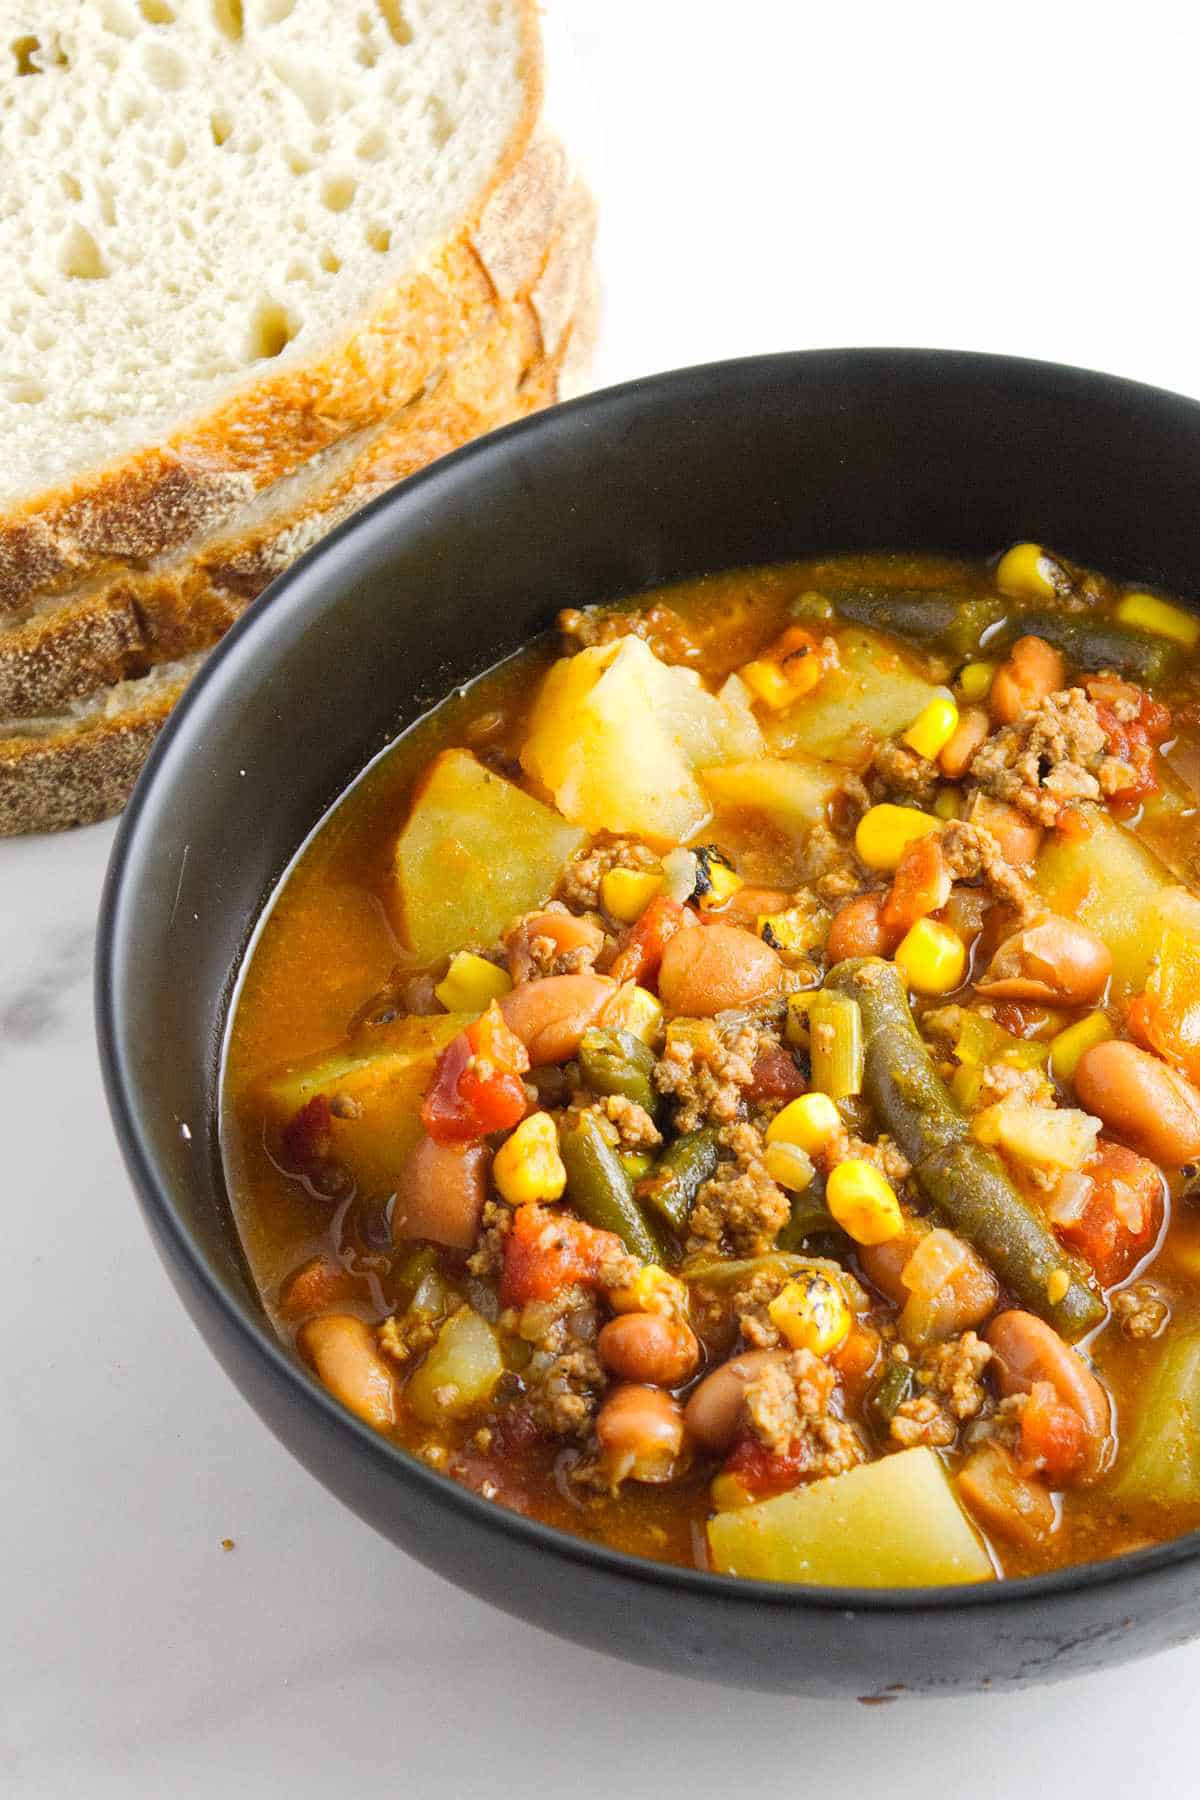 vegetable beef stew in a bowl with bread nearby.